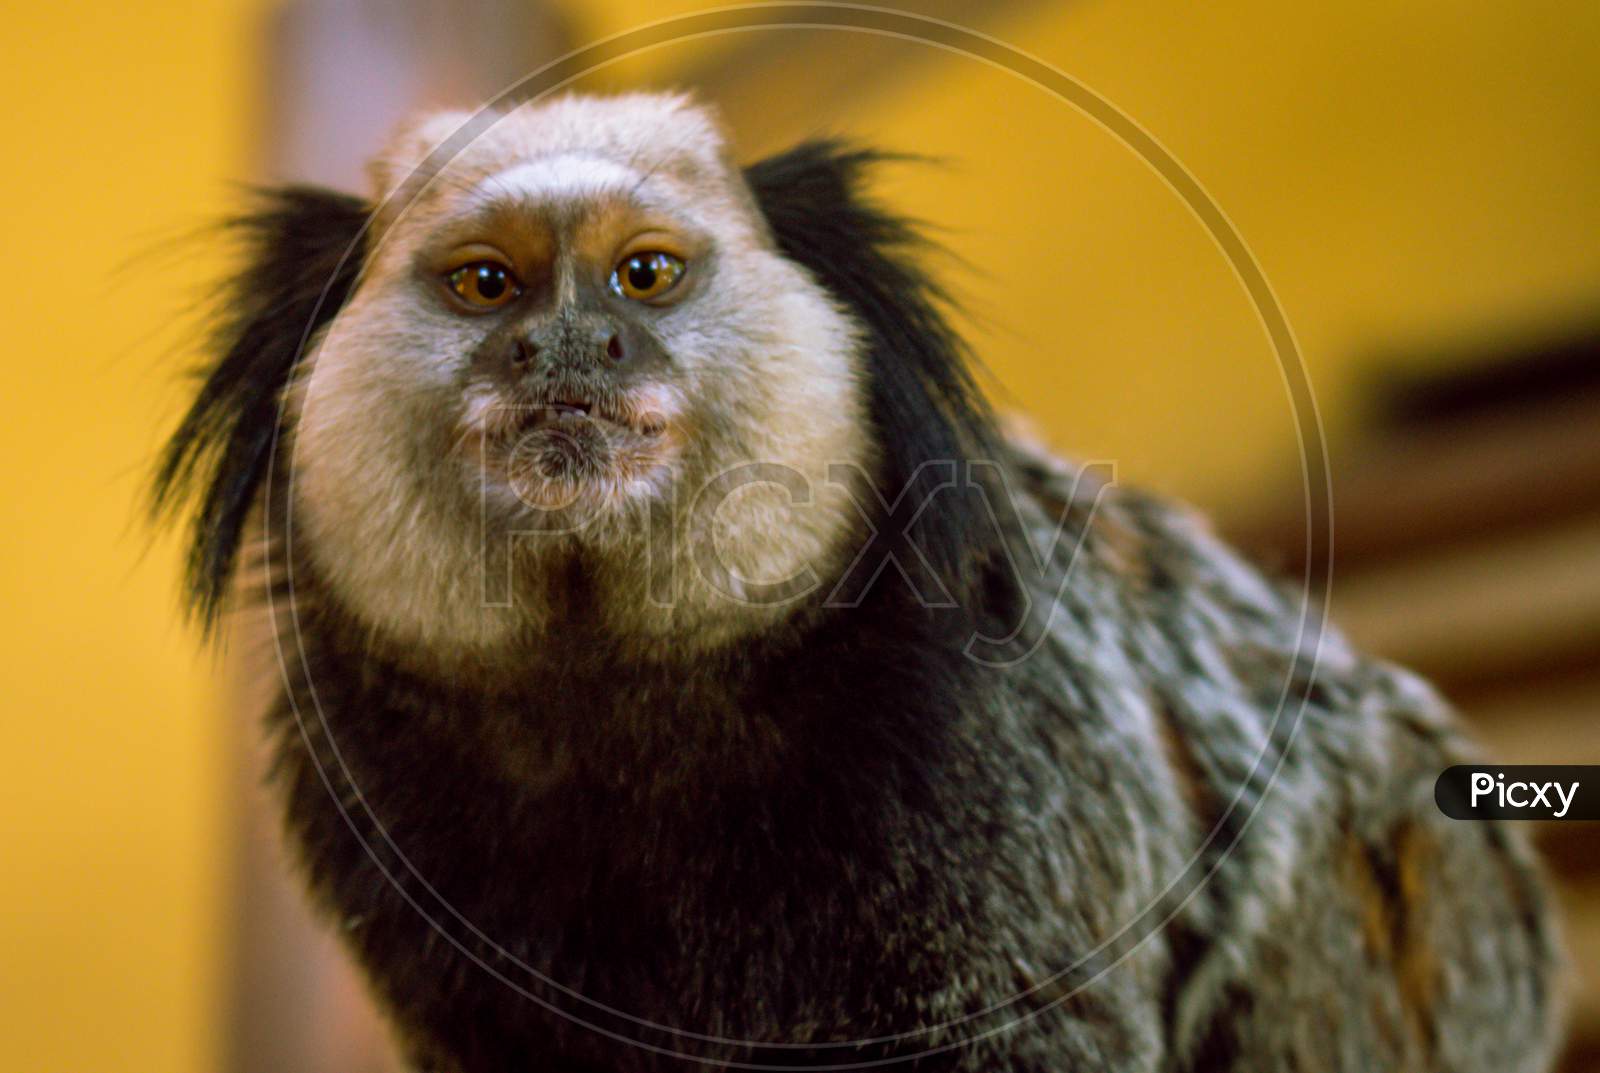 Little Monkey From The North Of Brazil. Endangered Wild Animal. Small Primate